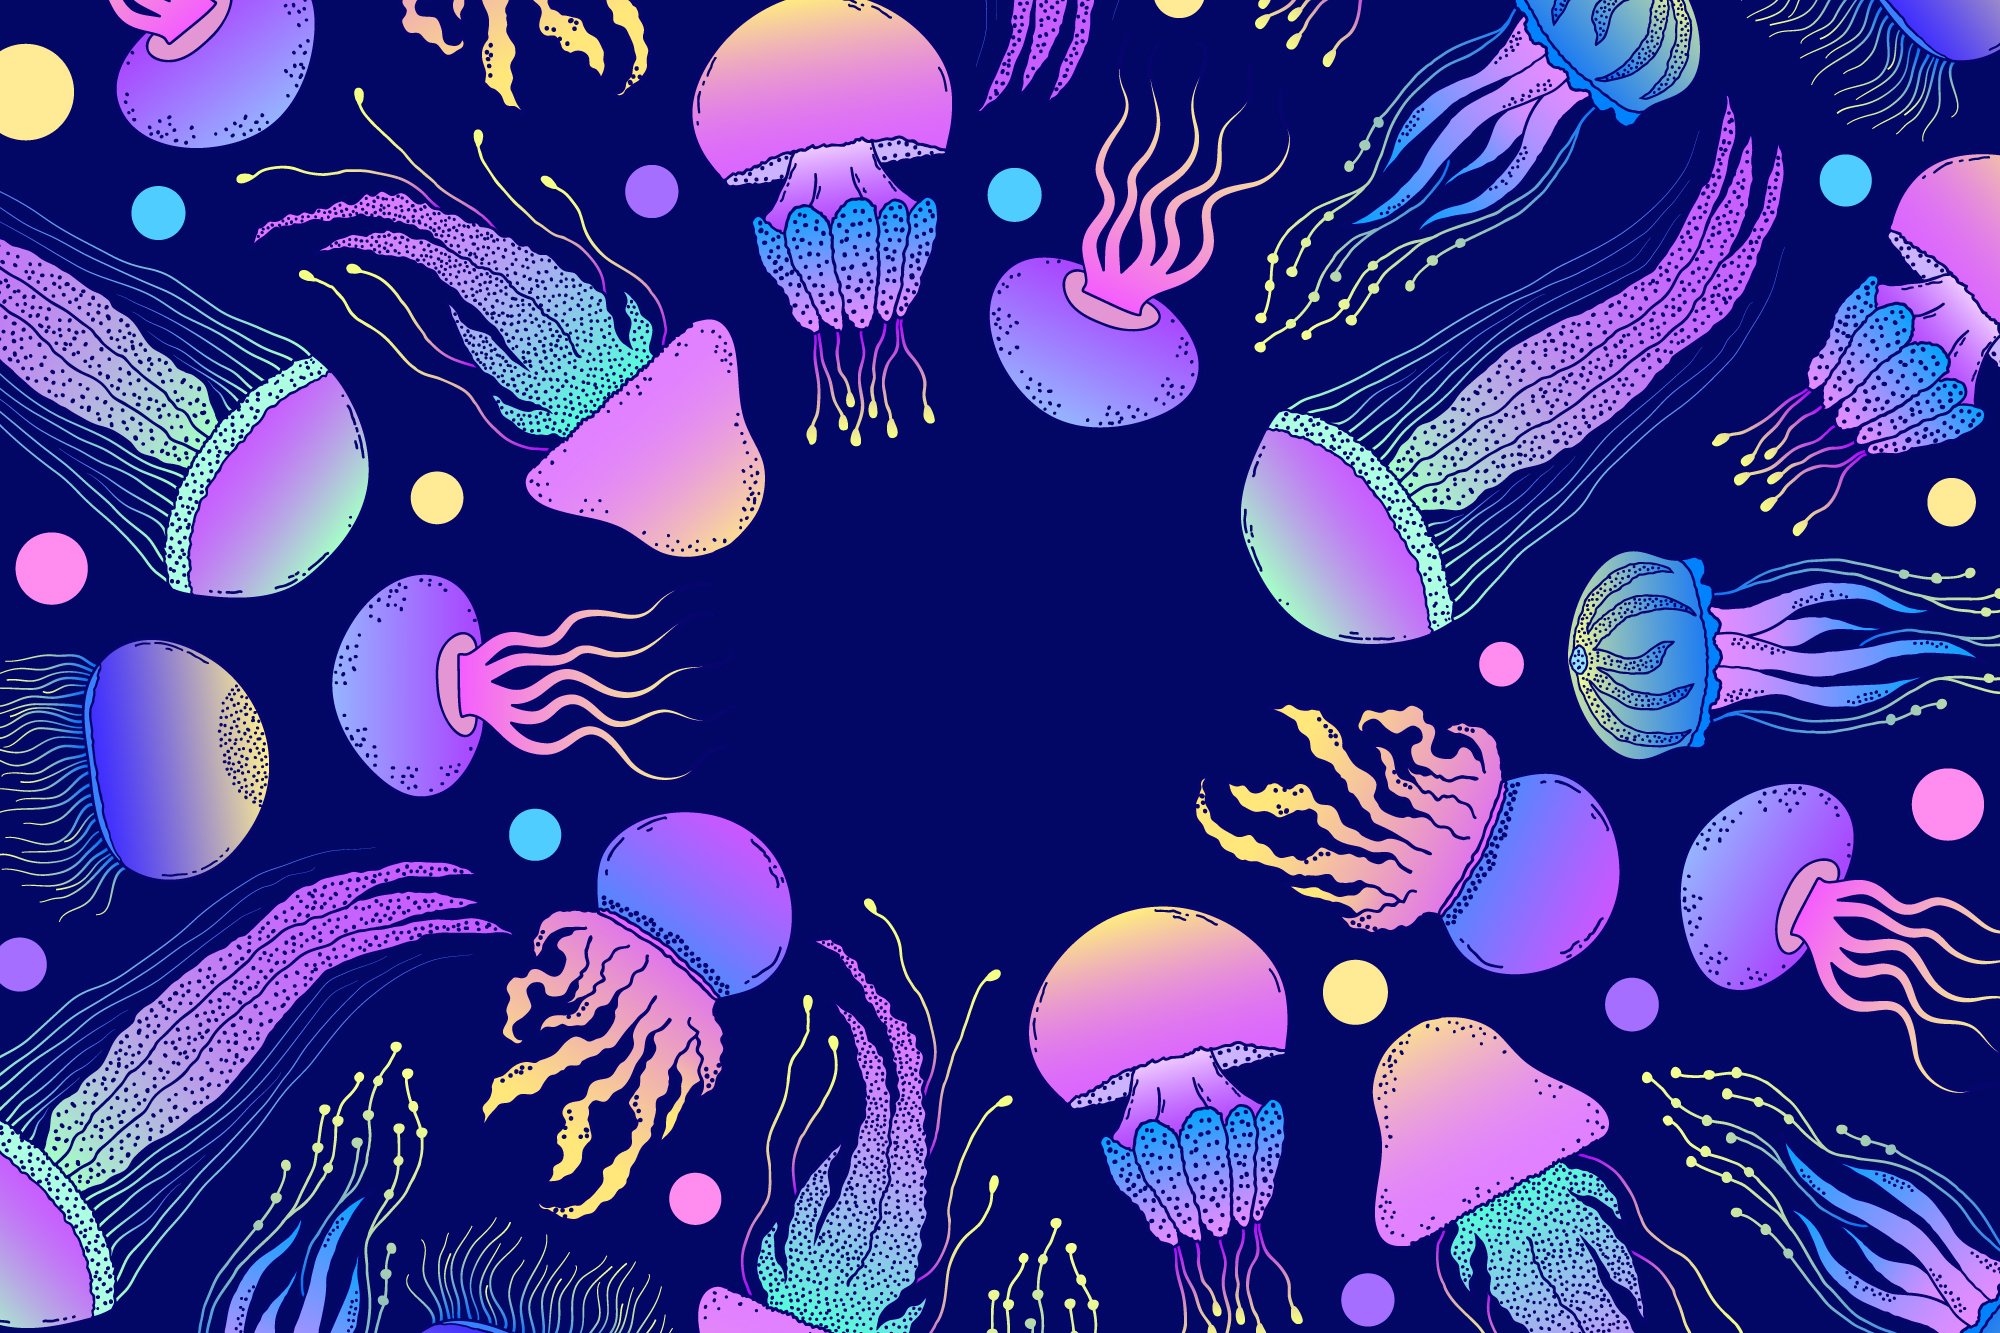 A lot gradient purple jellyfishes.